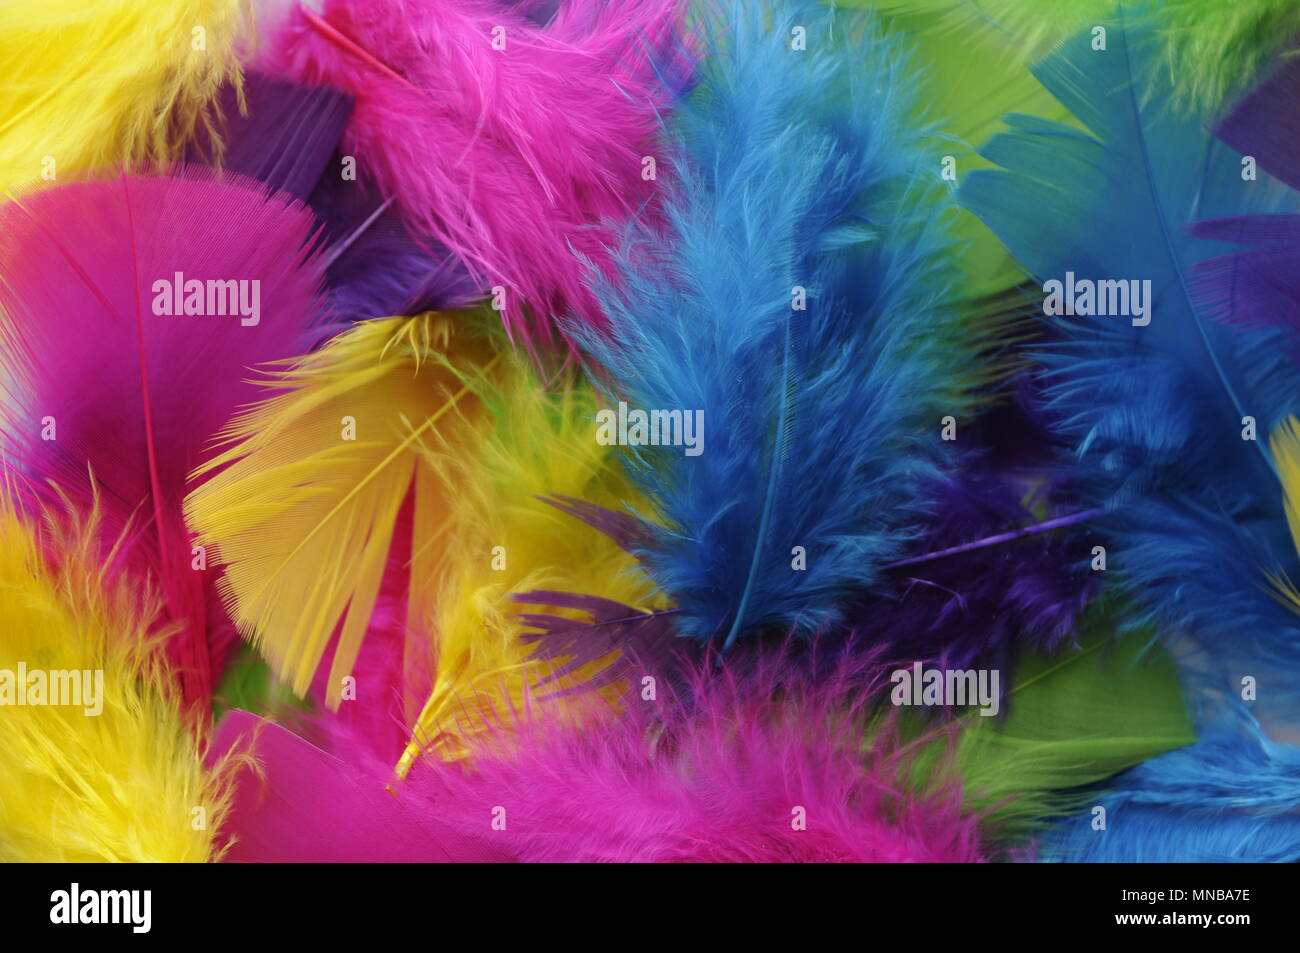 Colorful smooth and soft feathers background Stock Photo